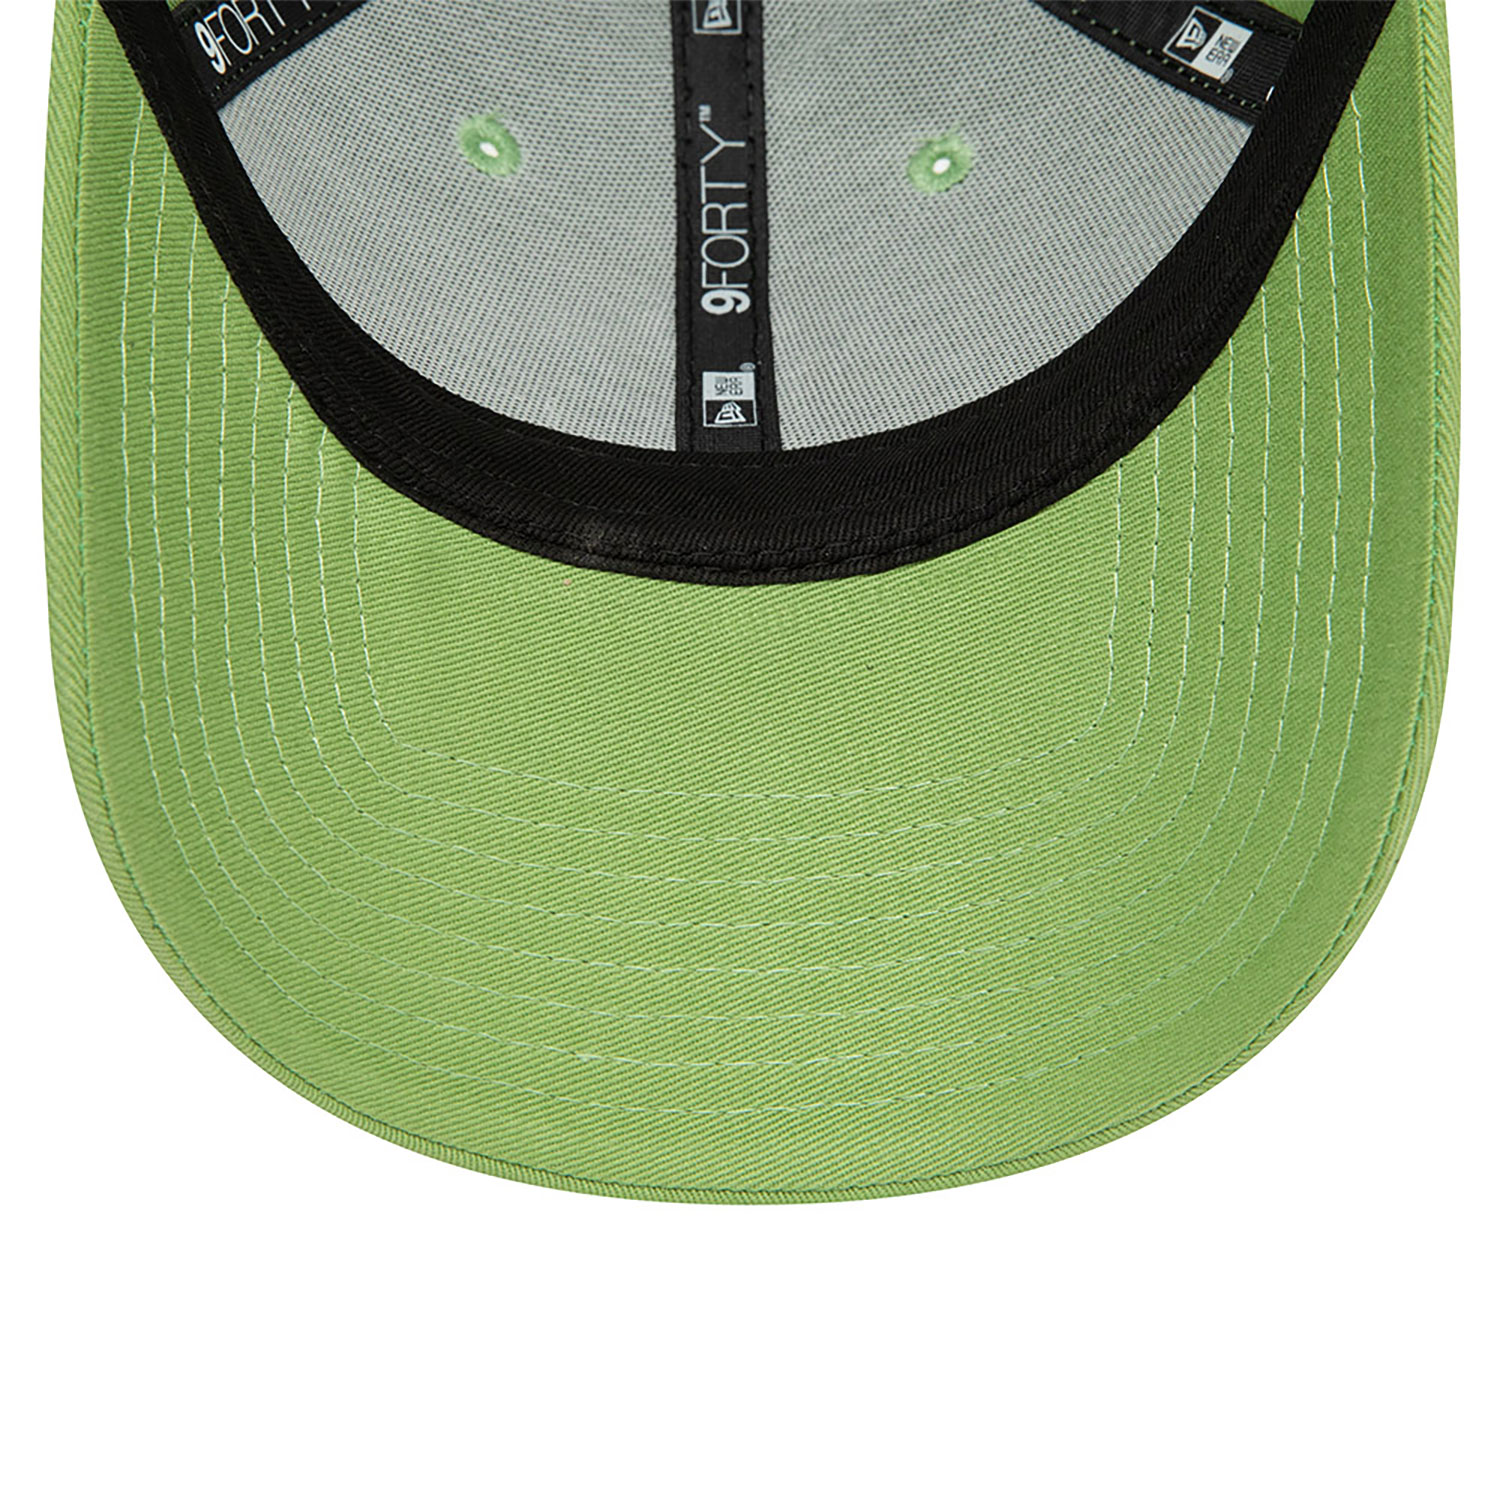 New York Yankees League Essential Green 9FORTY Adjustable Cap